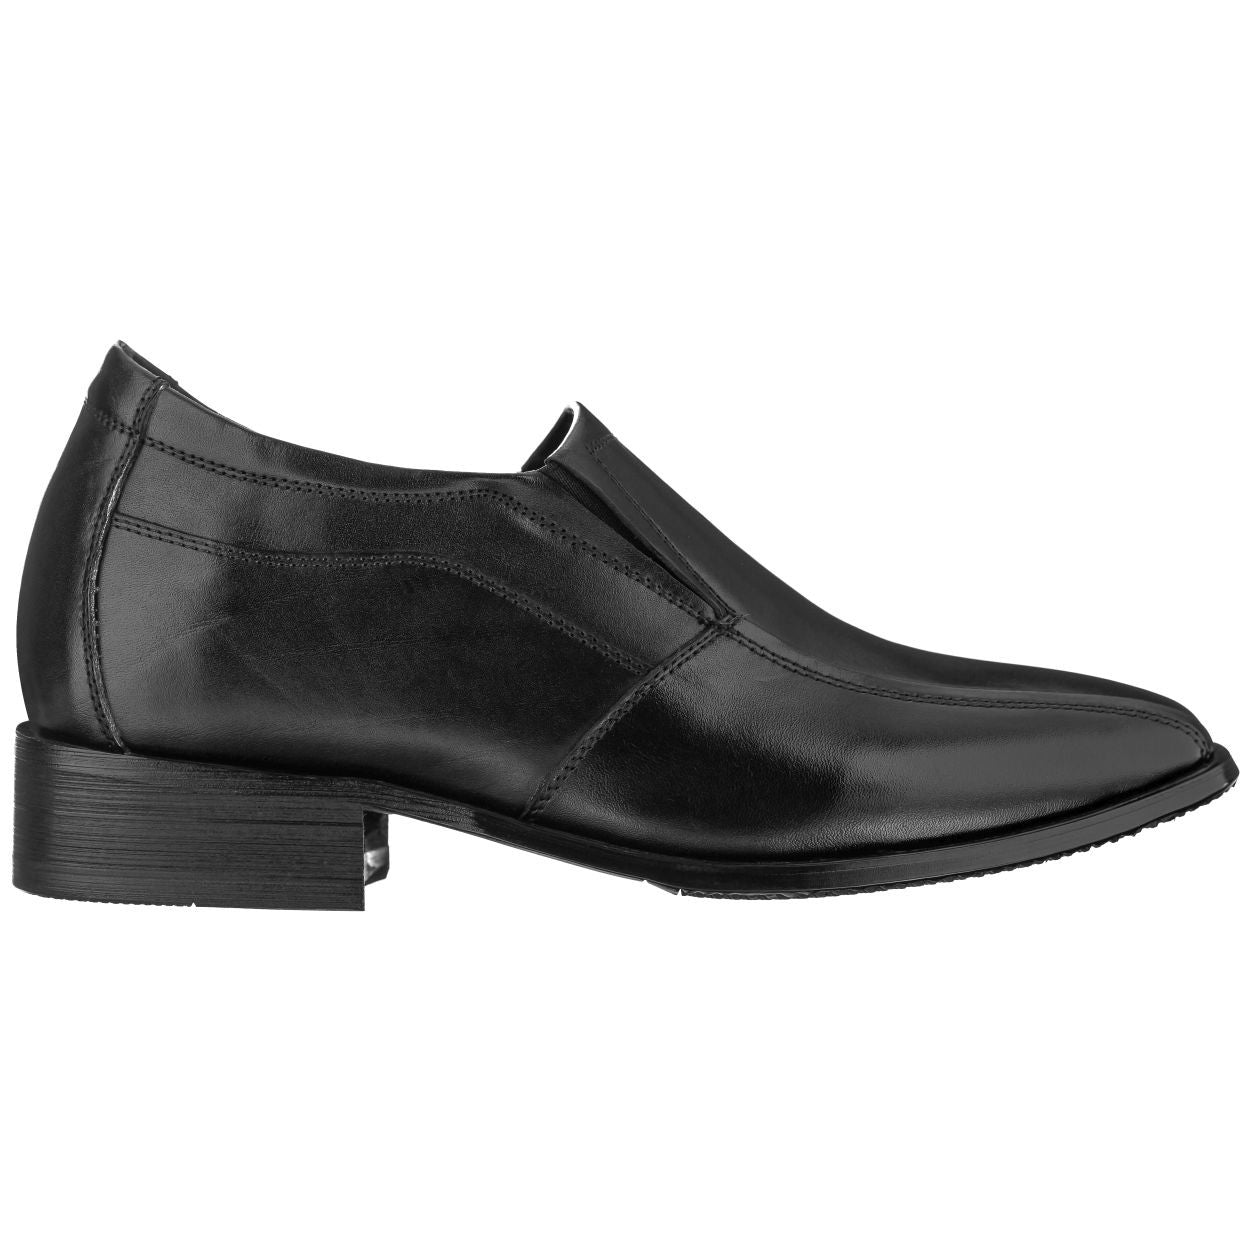 Elevator shoes height increase CALDEN - K0285 - 2.8 Inches Taller (Black)